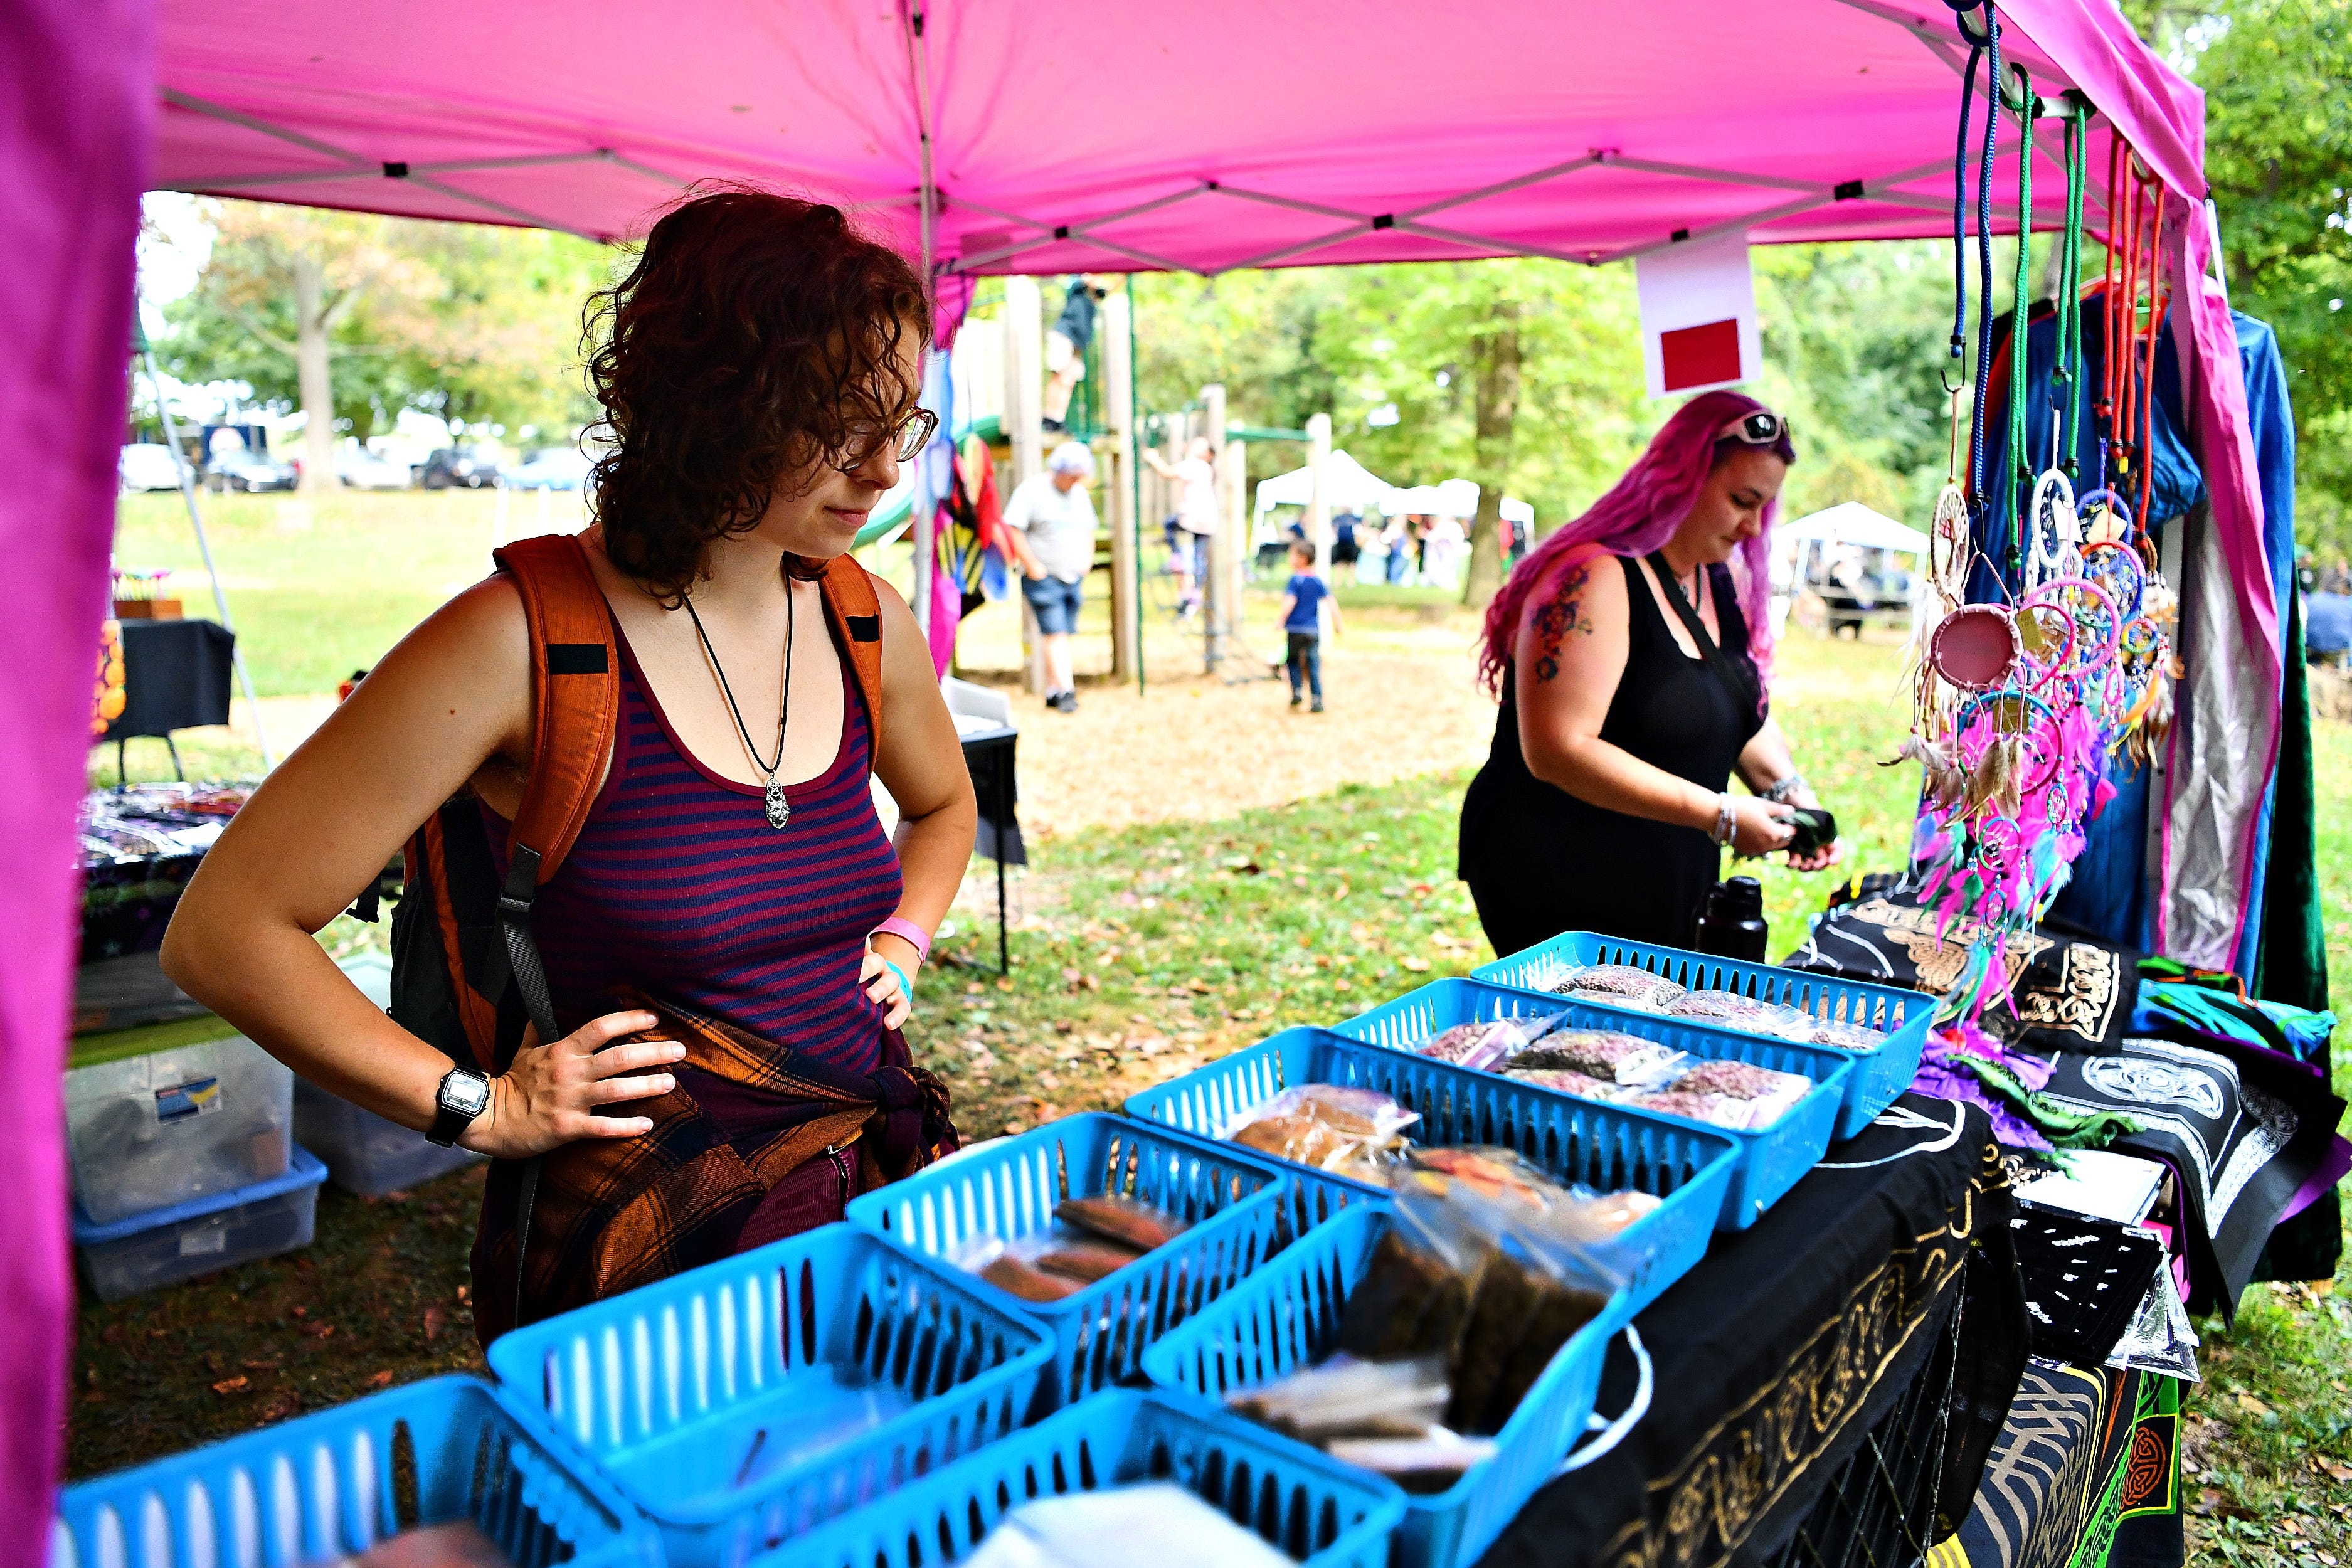 Melanie Gorguny, of Reading, left, and Marianne Hawkspirit, of Shermansdale in Perry County, shop at the Needful Things vendor tent during the 8th annual Pagan Pride Festival at Samuel S. Lewis State Park in Lower Windsor Township, Saturday, Sept. 28, 2019. Dawn J. Sagert photo